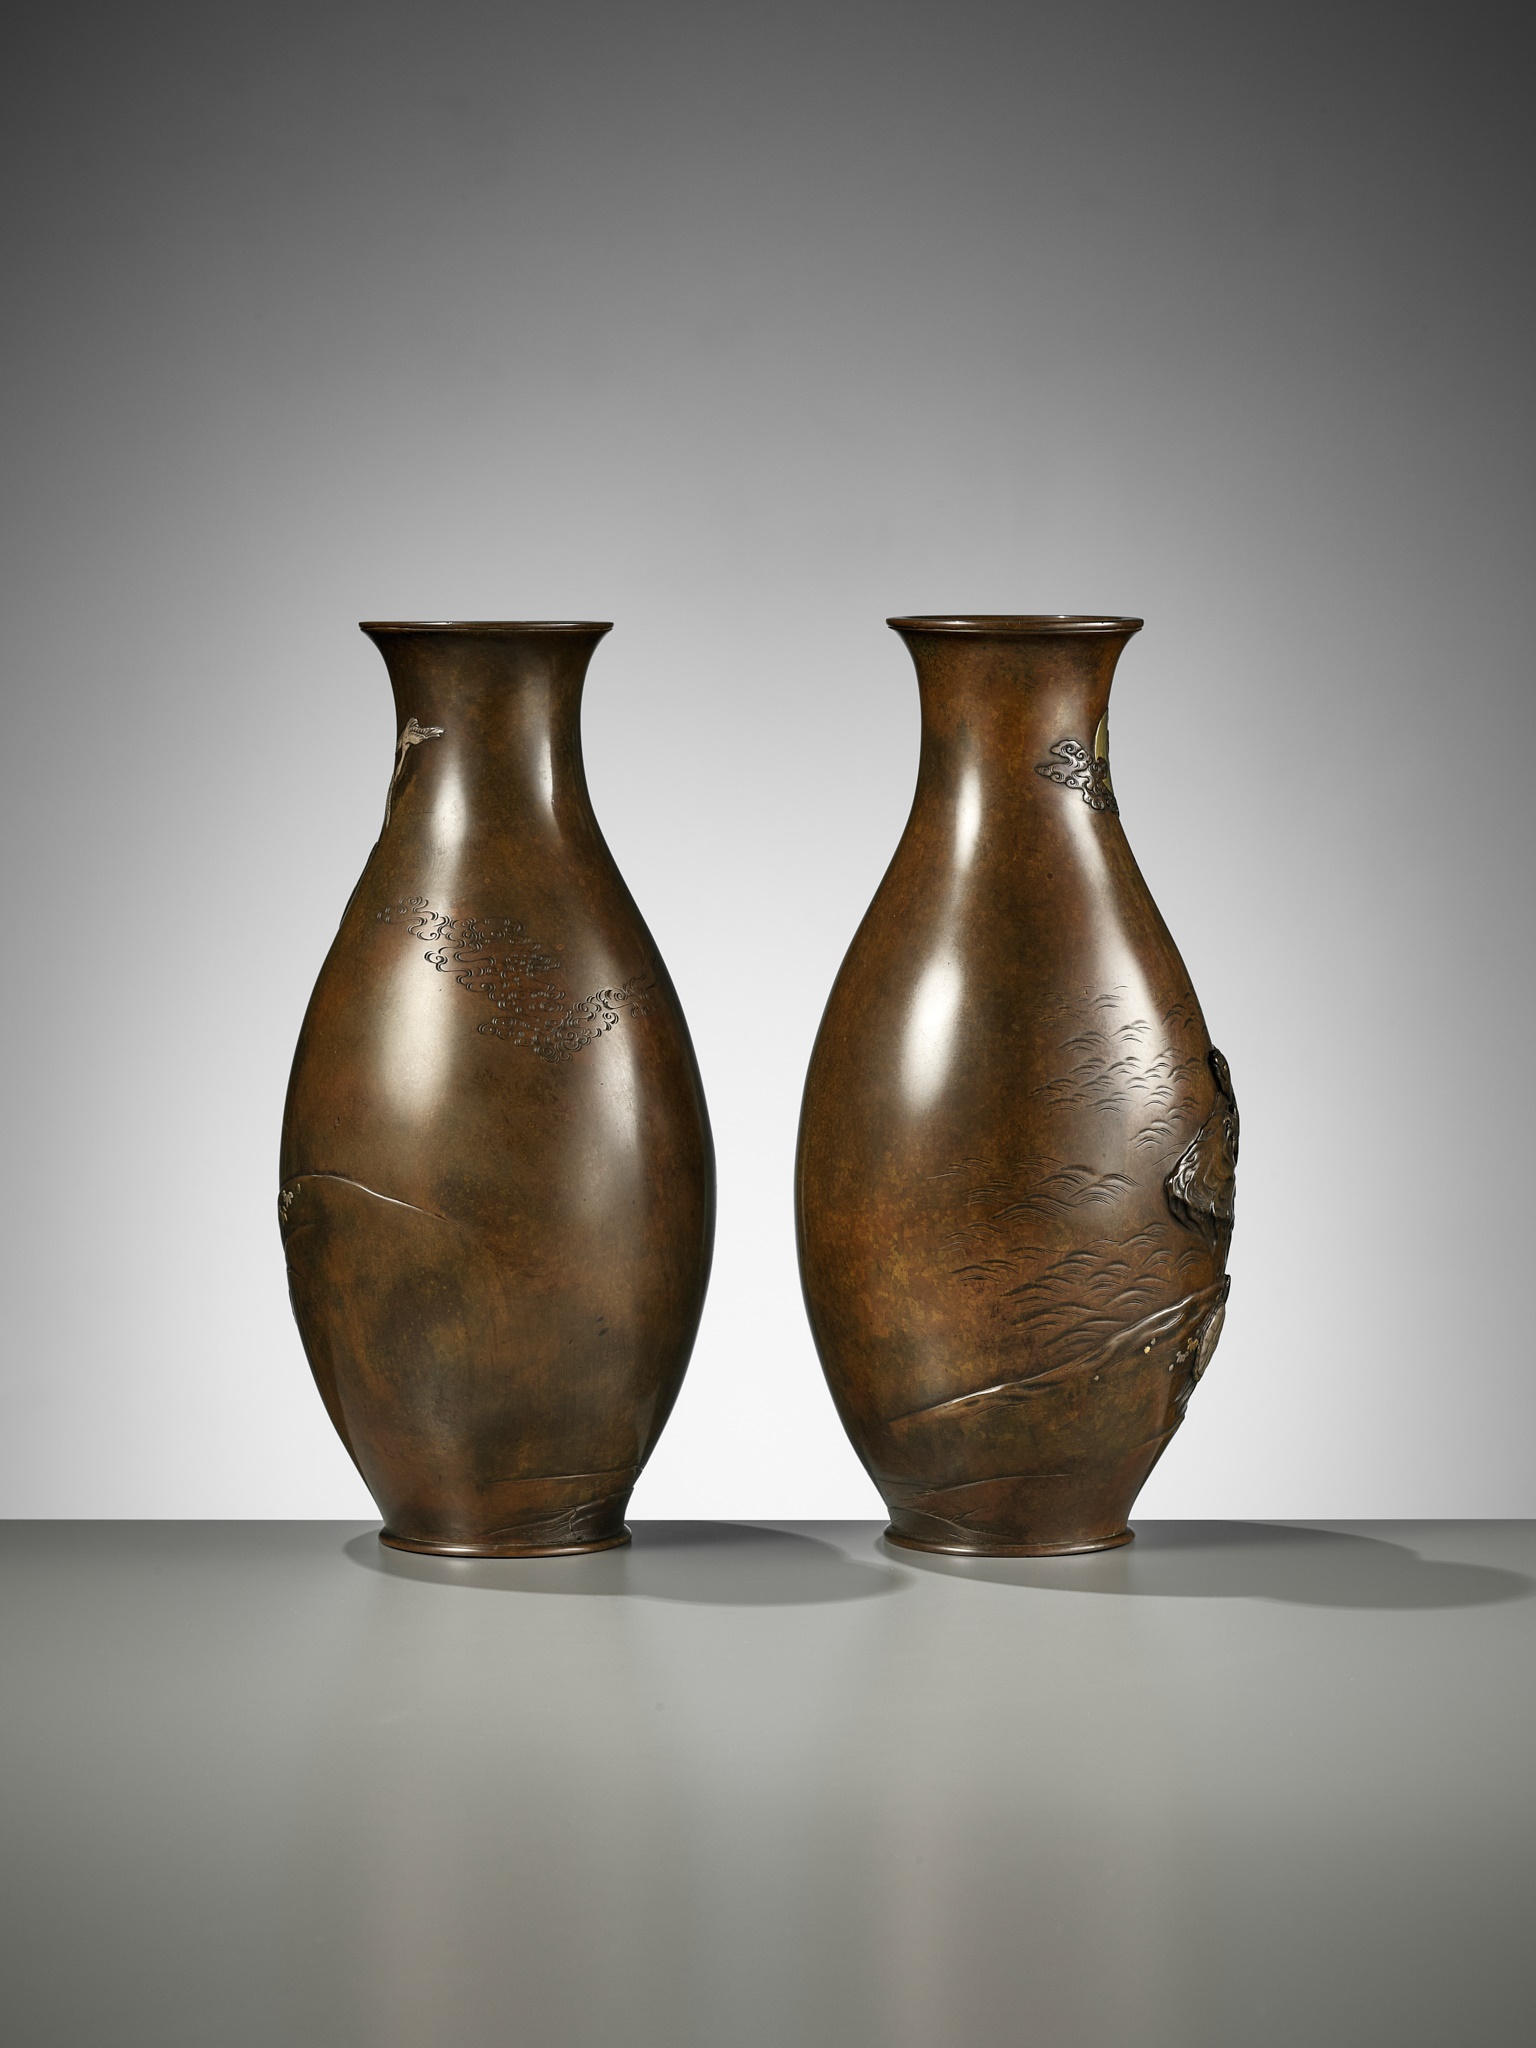 CHOMIN: A SUPERB PAIR OF INLAID BRONZE VASES WITH MINOGAME AND GEESE - Image 7 of 12